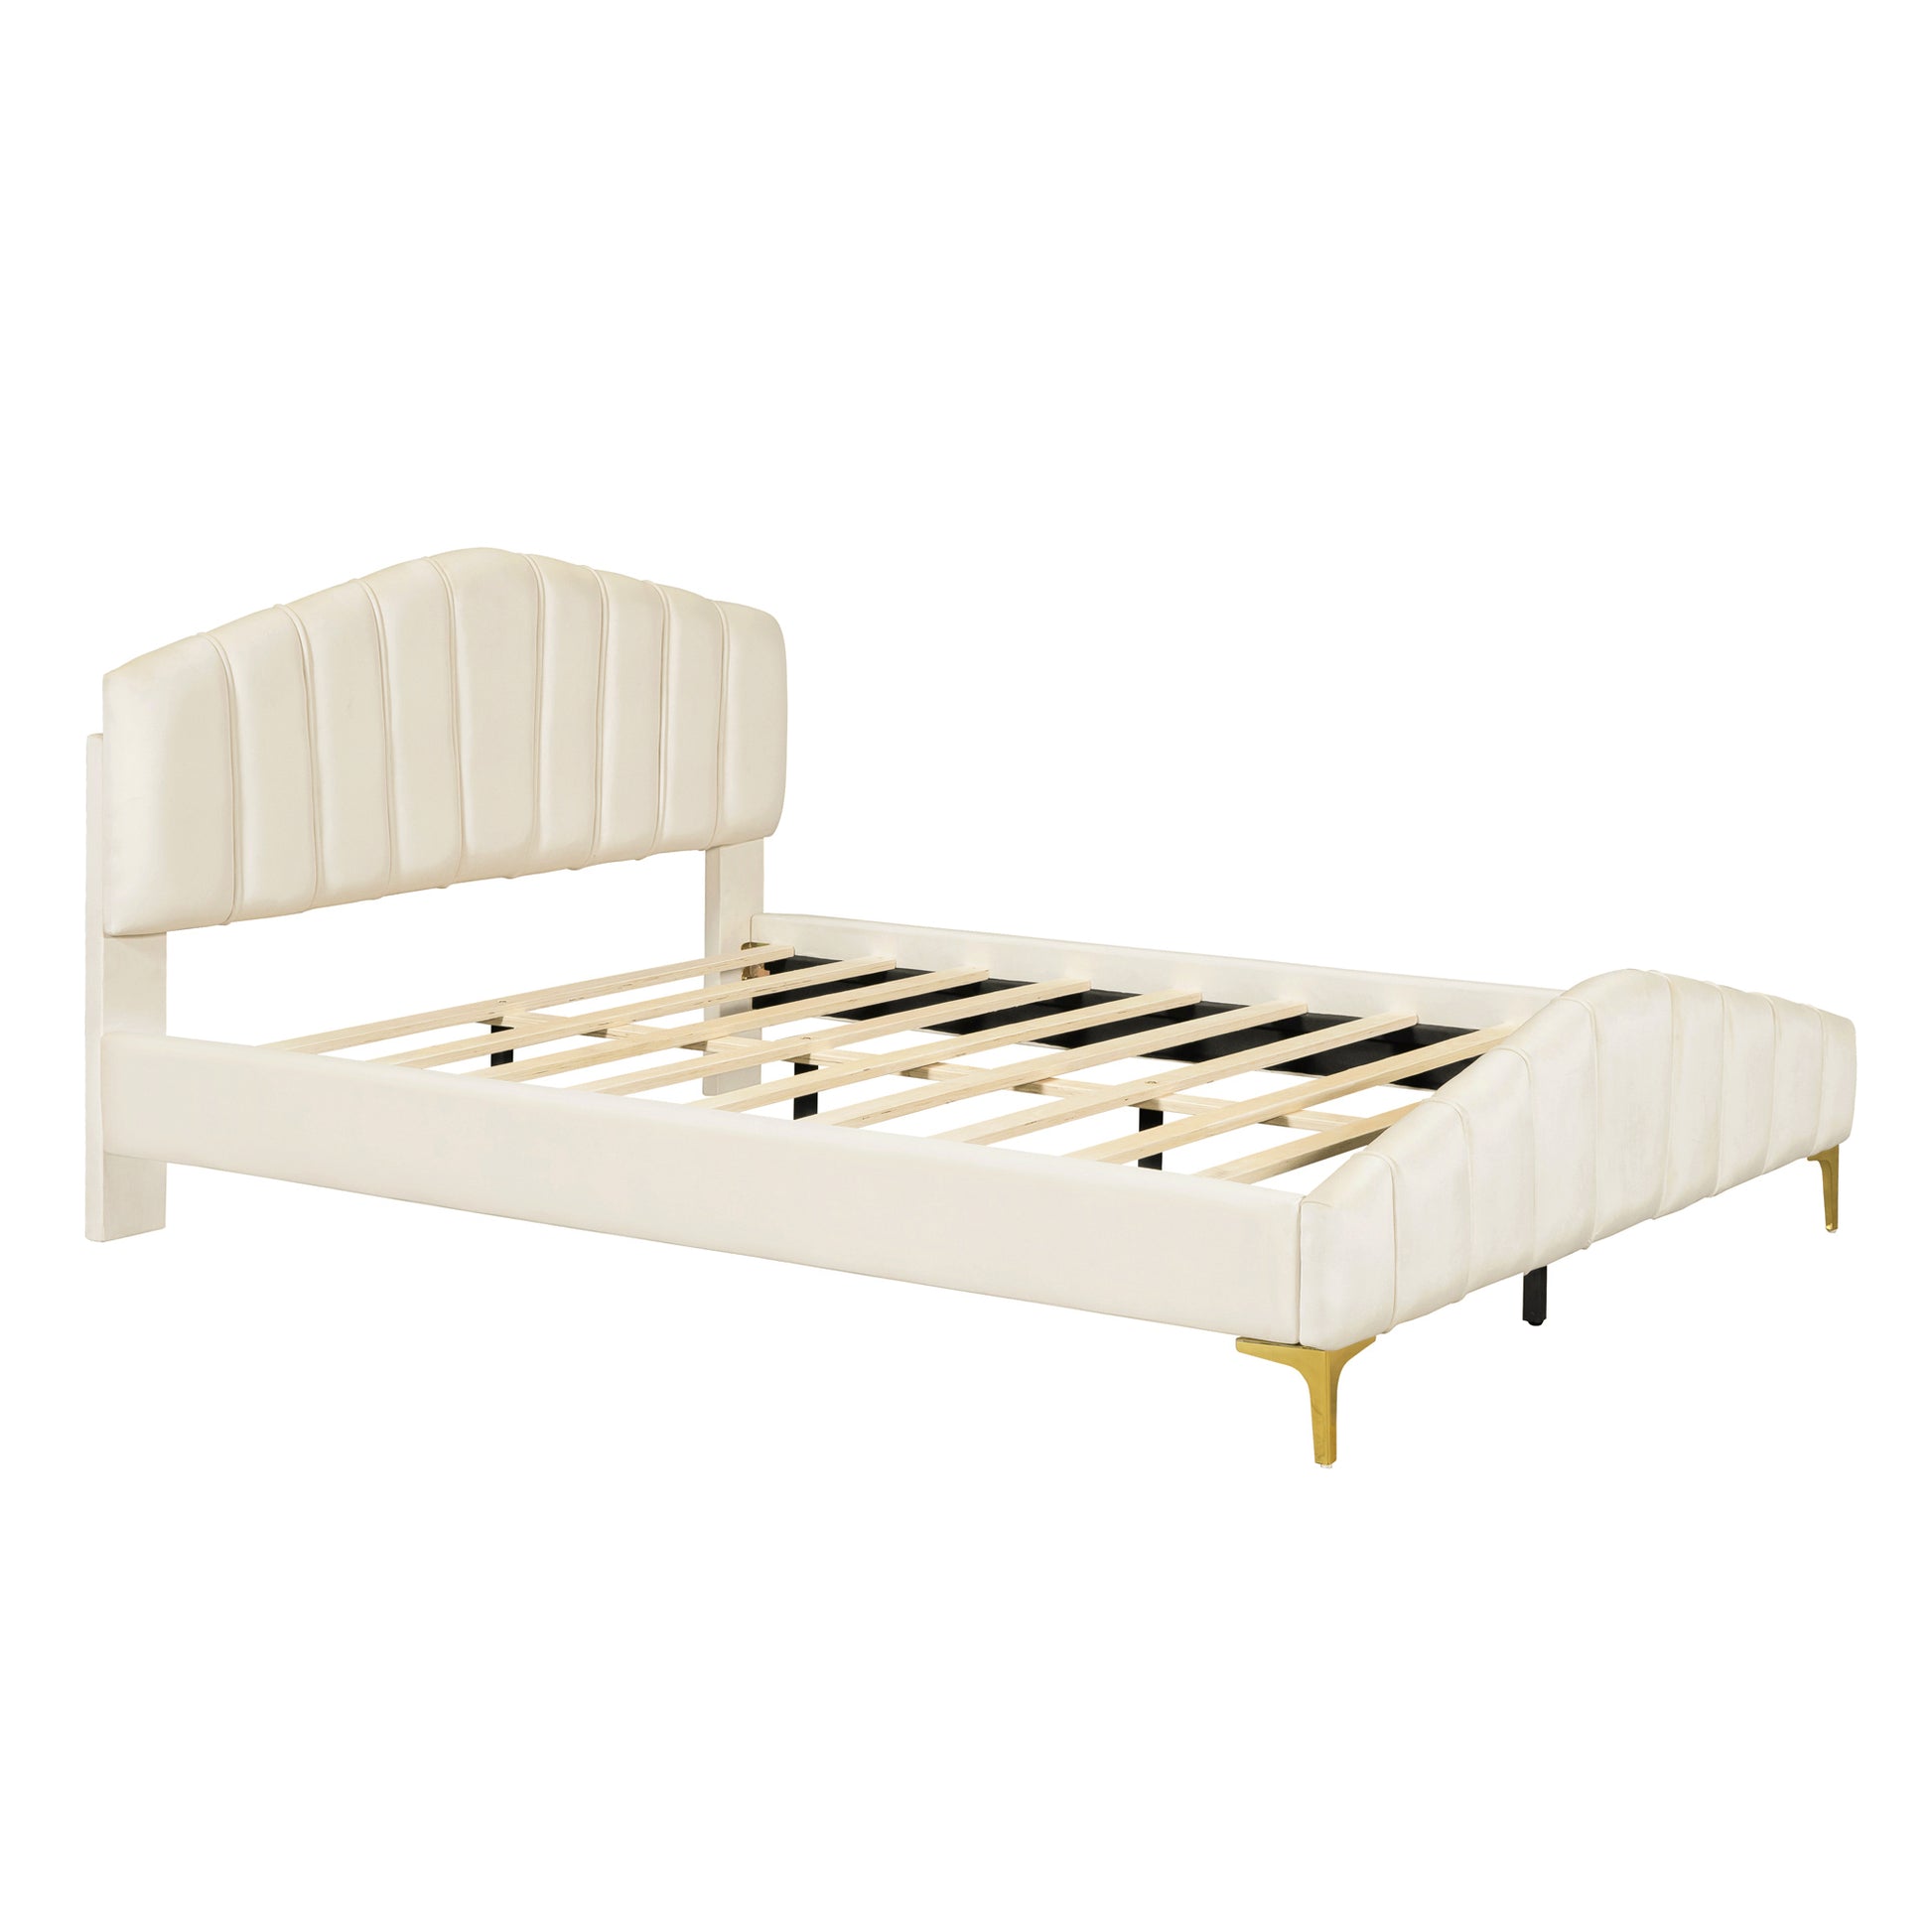 Queen Size Velvet Platform Bed with Thick Fabric, Stylish Stripe Decorated Bedboard and Elegant Metal Bed Leg, Beige - Enova Luxe Home Store